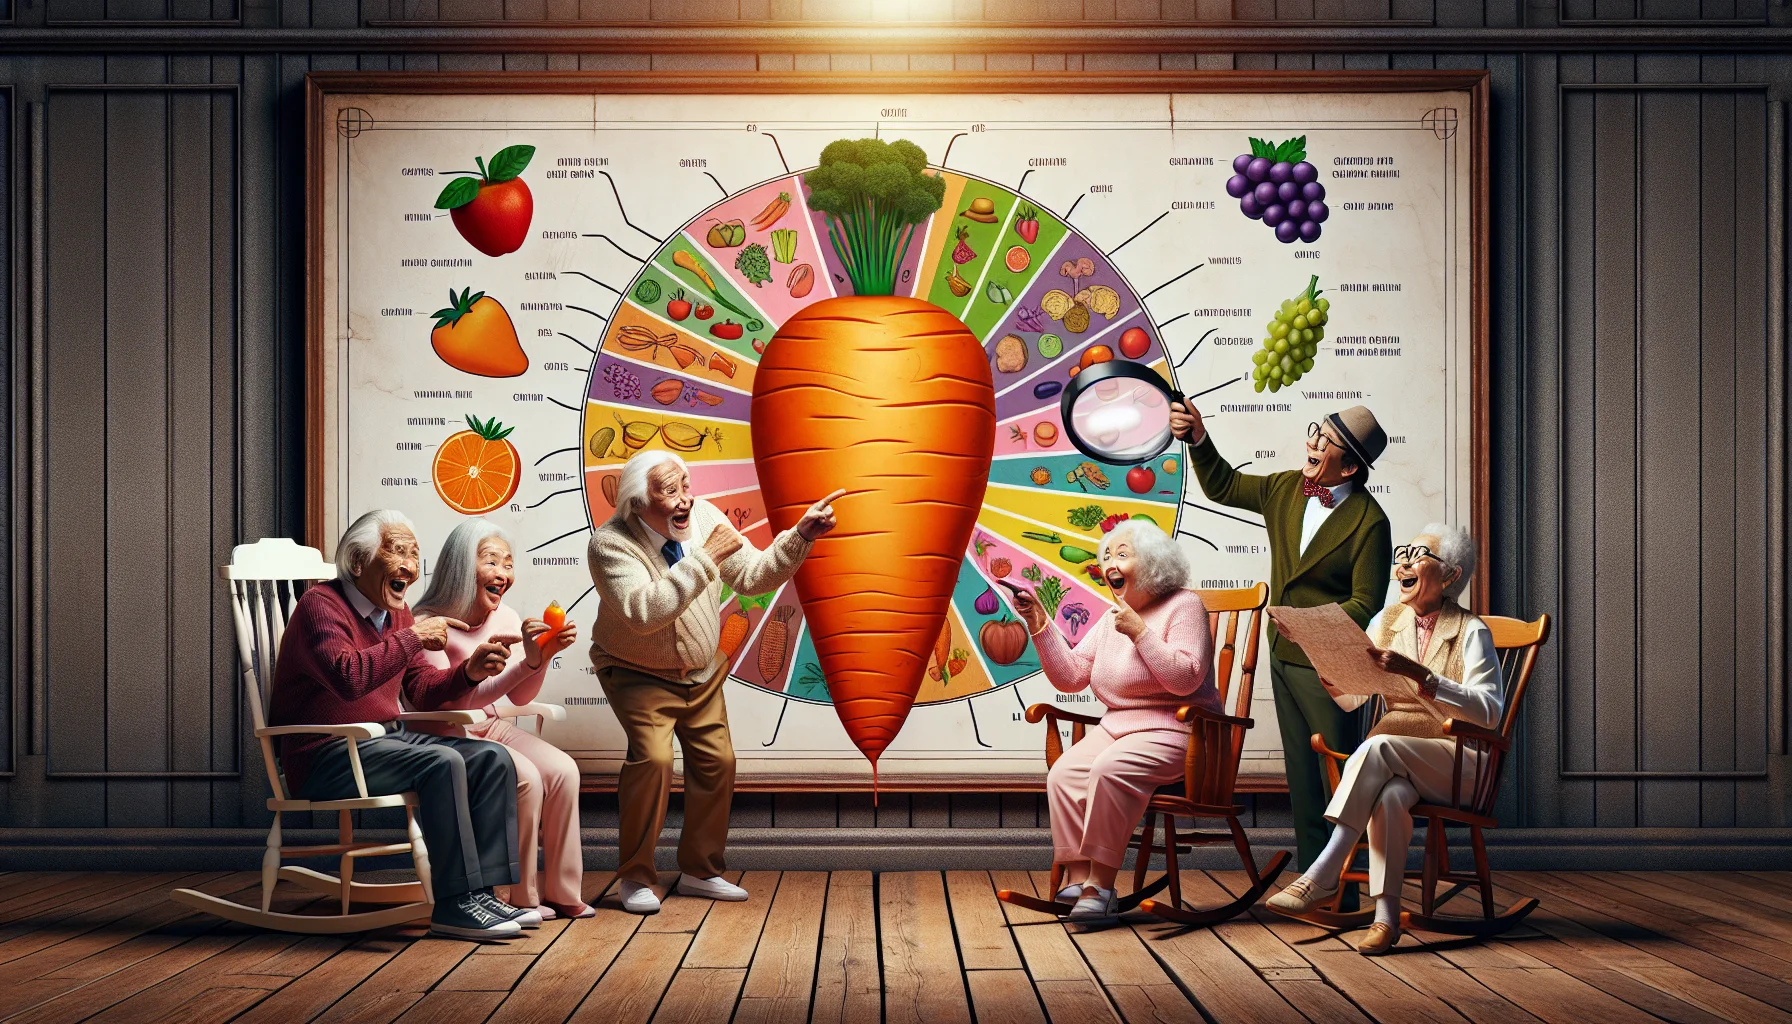 Imagine a humor-filled scene in which a group of elderly individuals are charmingly acting like detectives, orienting their attention to a gigantic chart placed on an elegantly aged wooden wall. The chart has colorful diagrams and illustrations of fruits, vegetables, and vitamins ideally beneficial for elderly skin health. A South Asian woman, vivaciously pointing at a gigantic carrot, sits on a rocking chair; a Hispanic man with a magnifying glass is hard at work inspecting a grape on the chart; and a jovial Middle-Eastern lady is meticulously taking notes next to the diagram of vitamin E. These seniors are trying their best to decipher the secrets to glowing skin, fueled with sportive energy and oozing laughter.